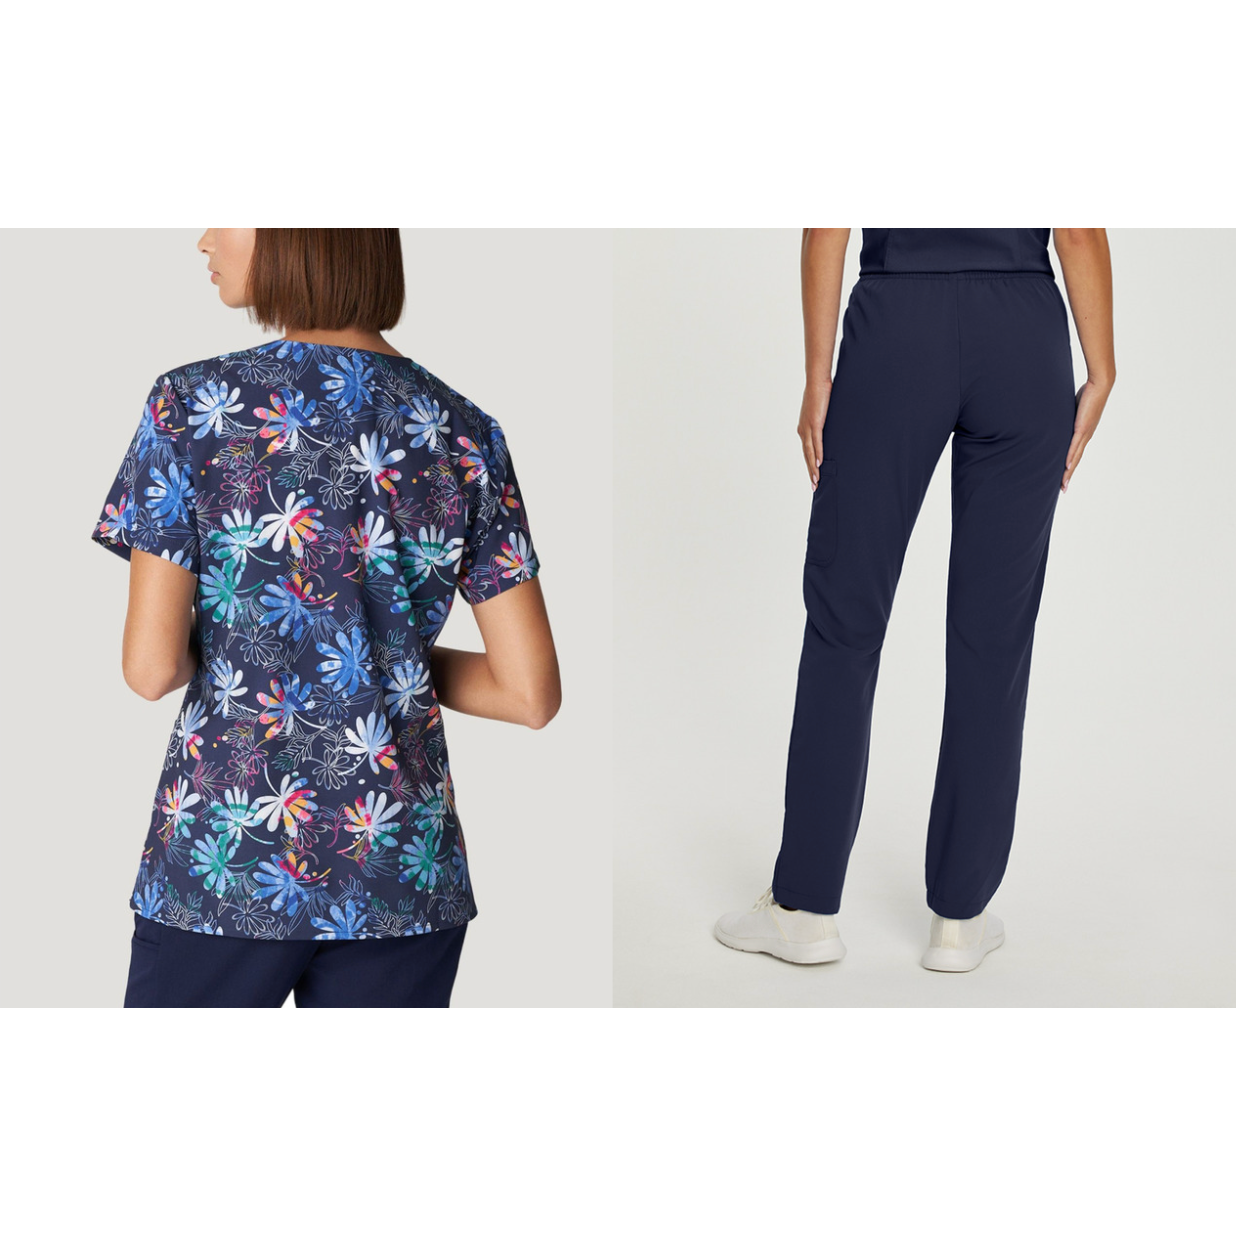 SCRUB SET Printed V-Neck Top and Navy Blue Pants Inseam 31'' 618/309 SALE